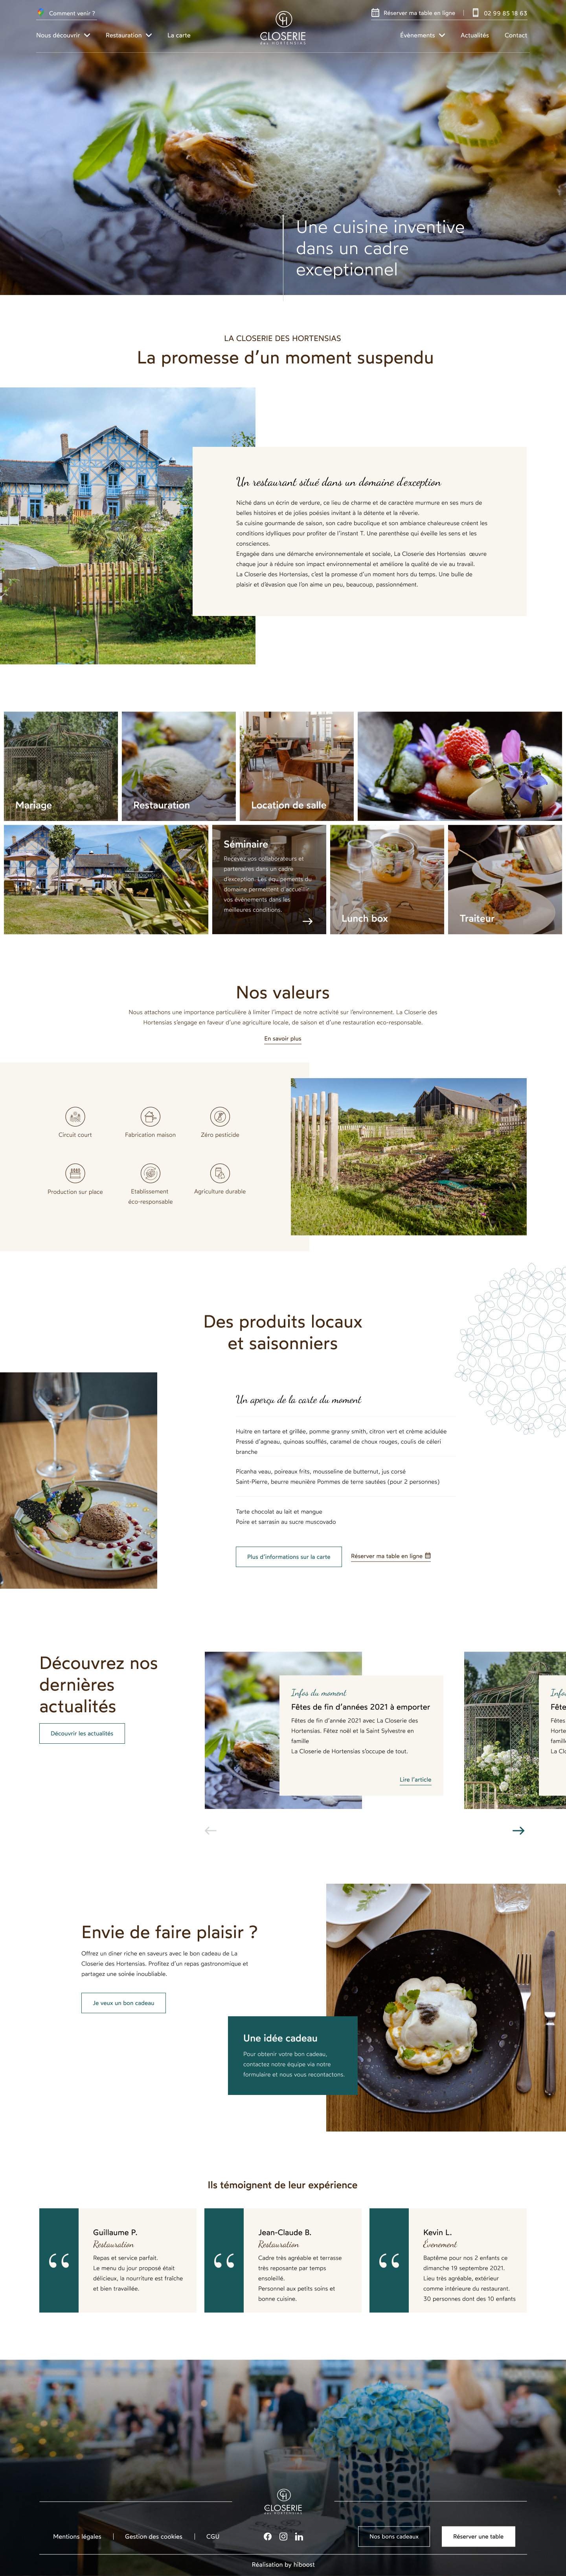 Homepage Closerie